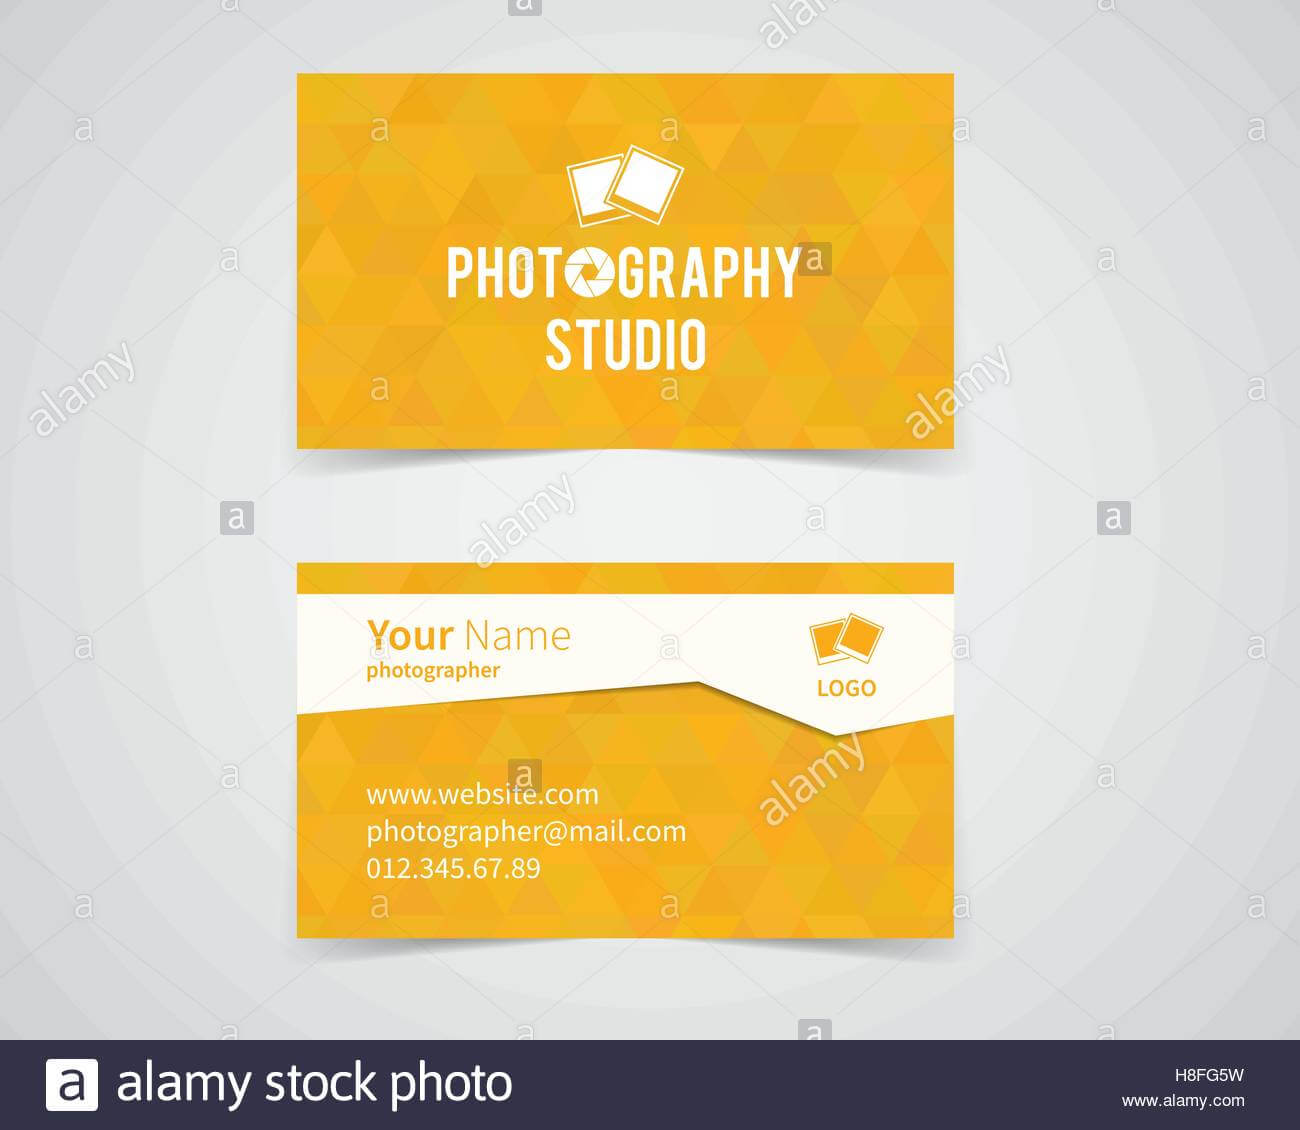 Modern Light Business Card Template For Photography Studio Within Photographer Id Card Template